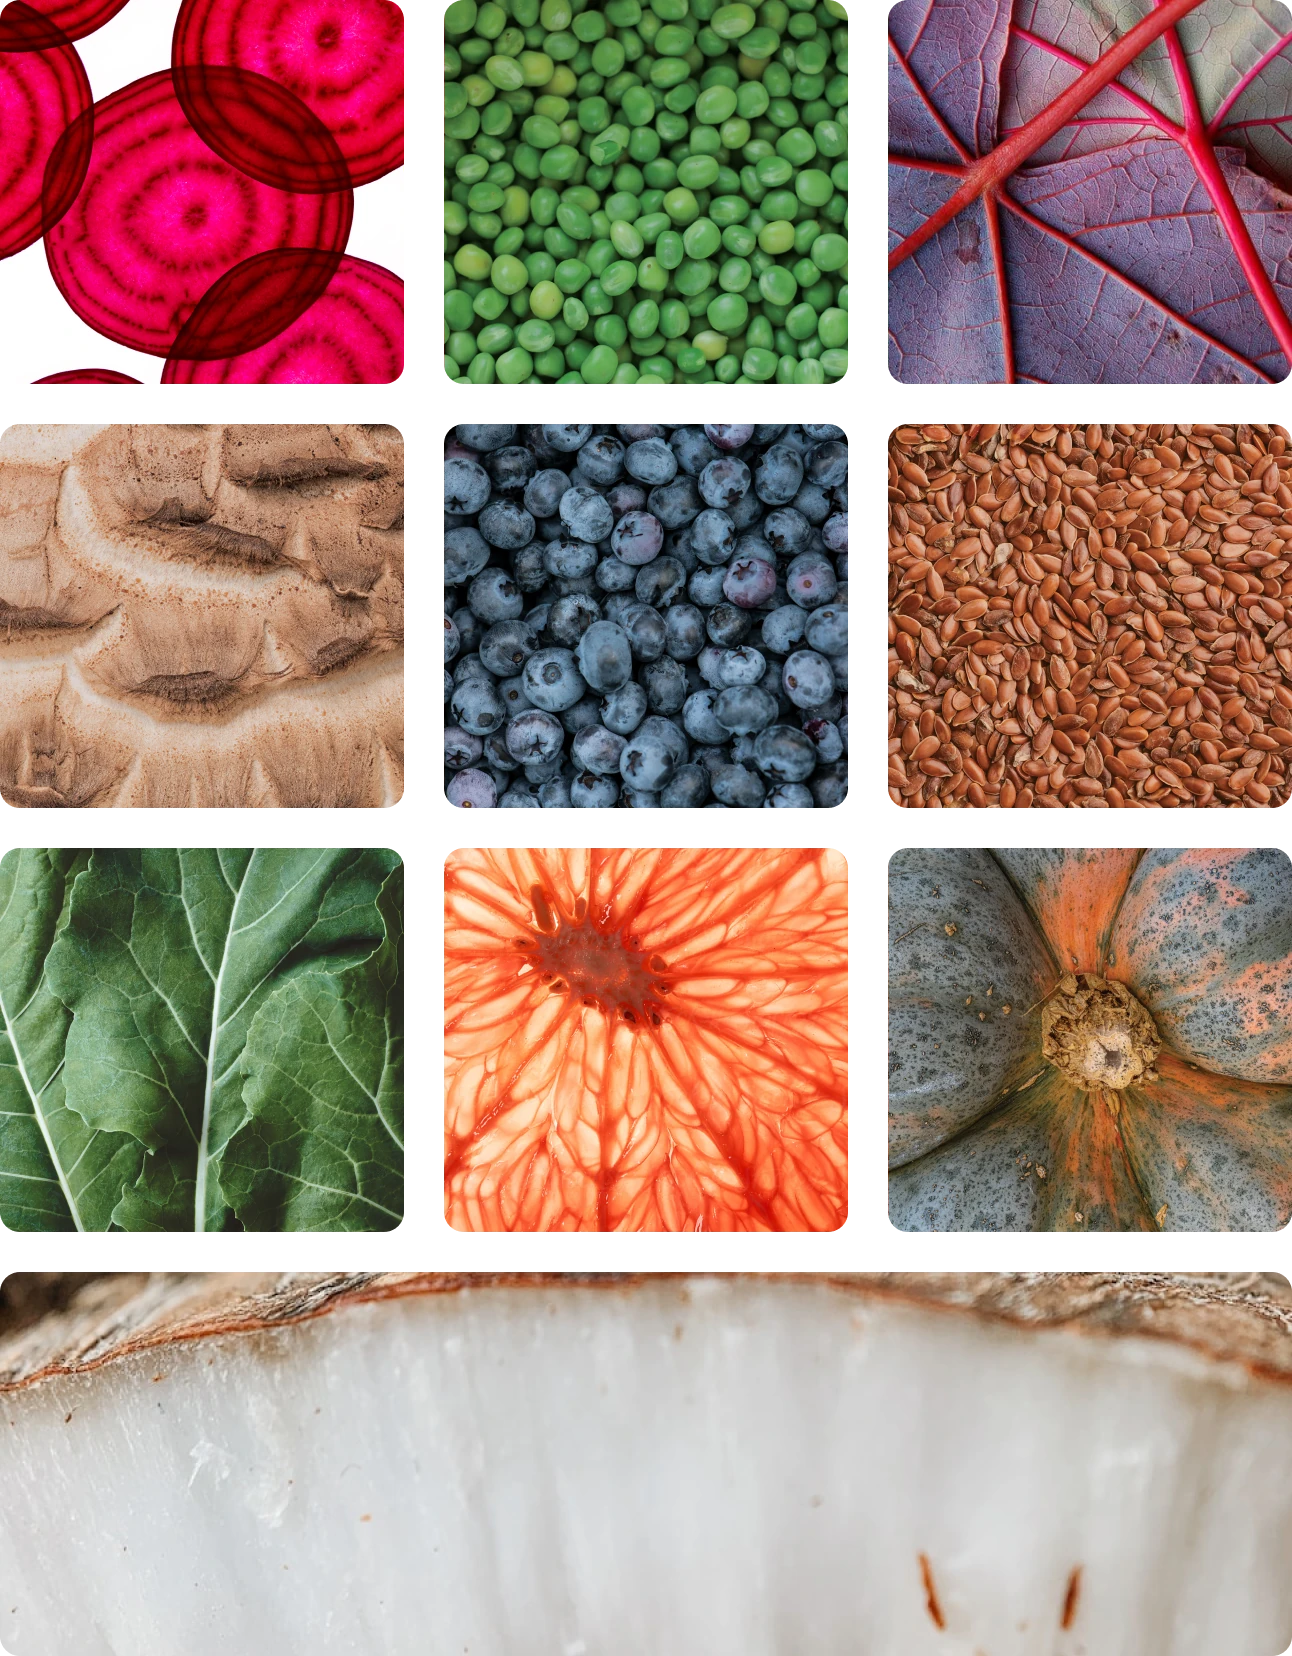 A 3 x 3 grid showing close ups of the whole fruits and vegetables ingrediants used to make HEAL. 